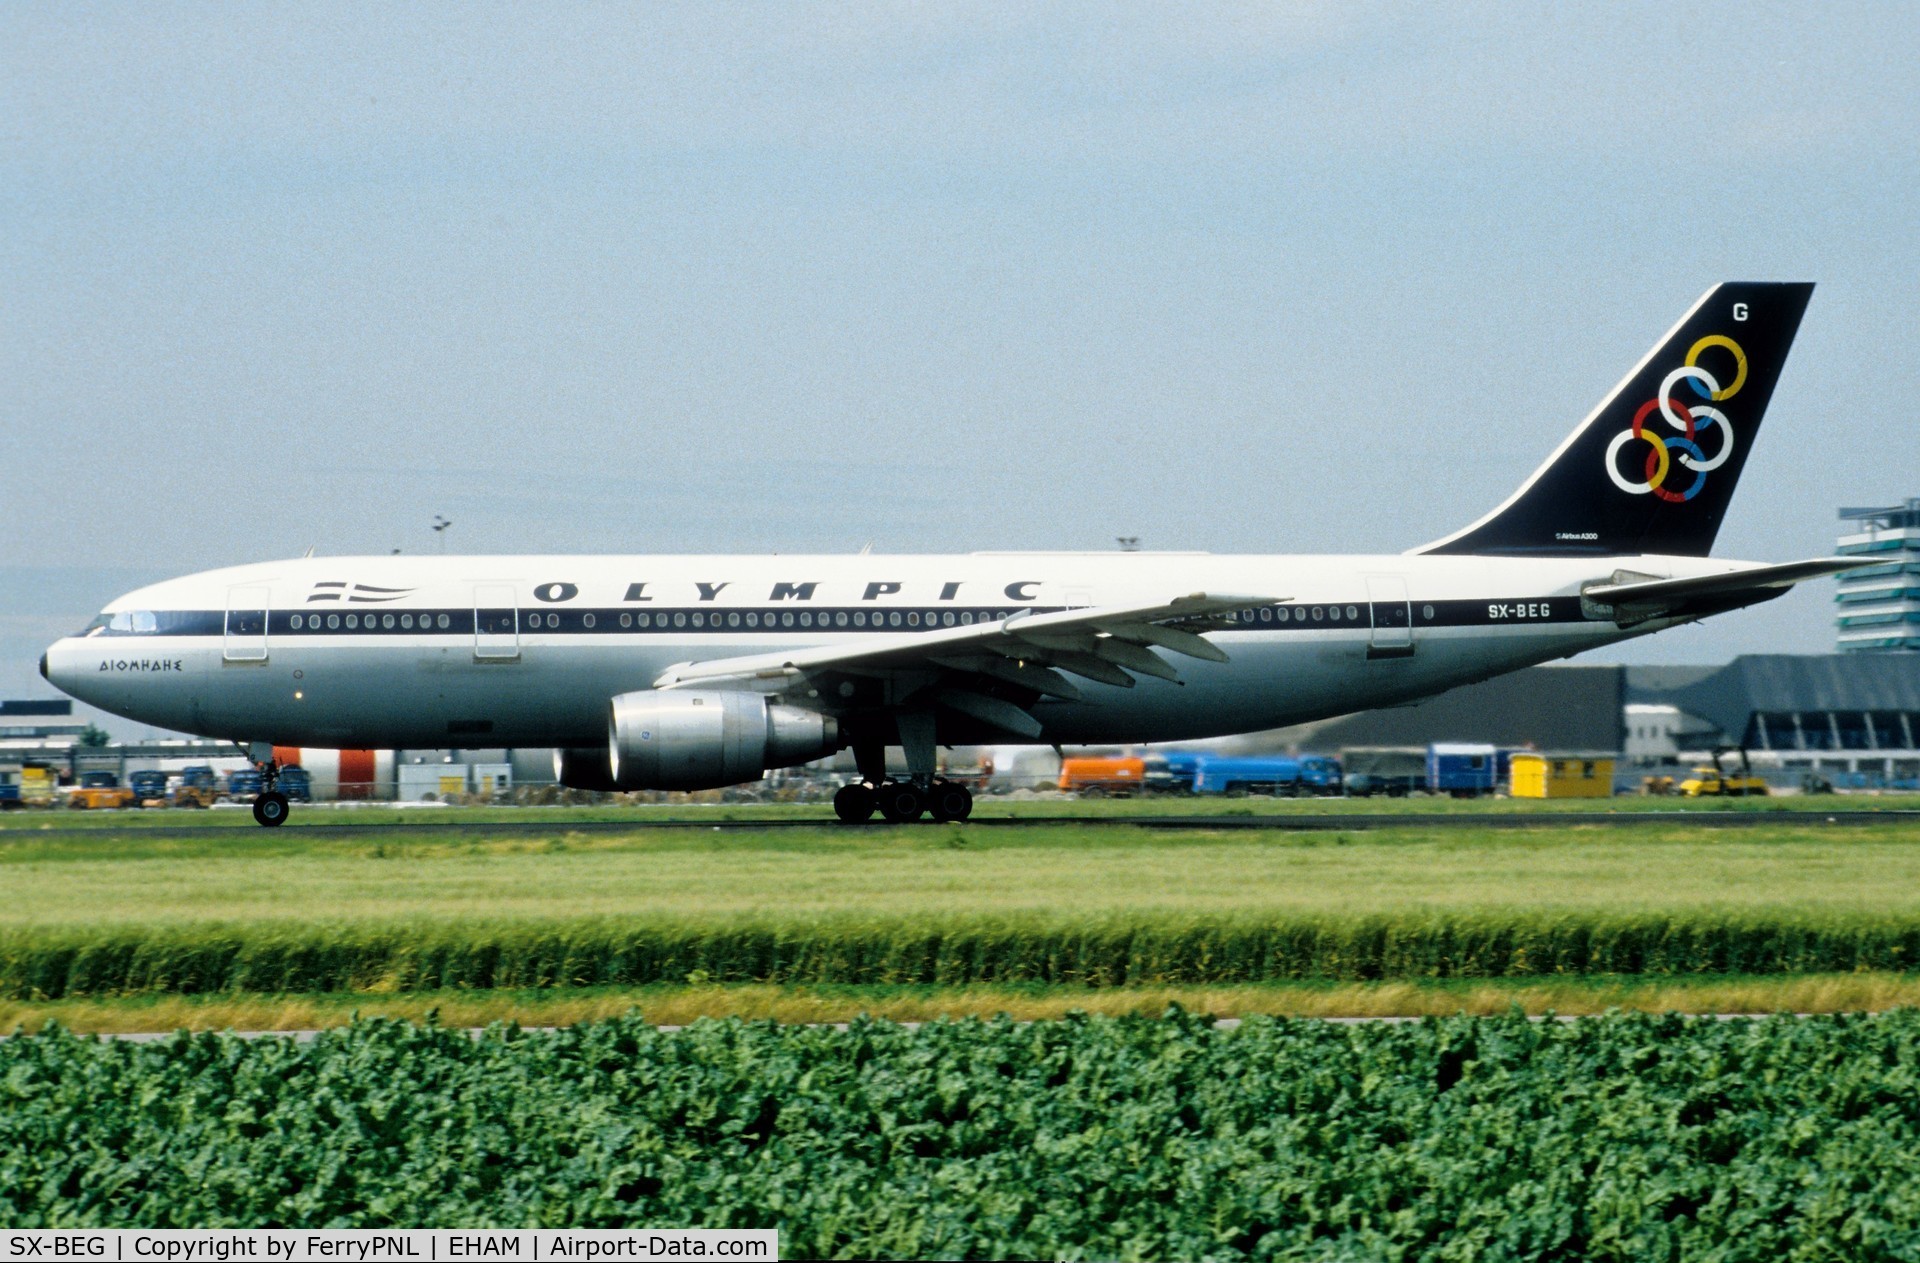 SX-BEG, 1981 Airbus A300B4-103(F) C/N 0148, Departure of Olympic A300